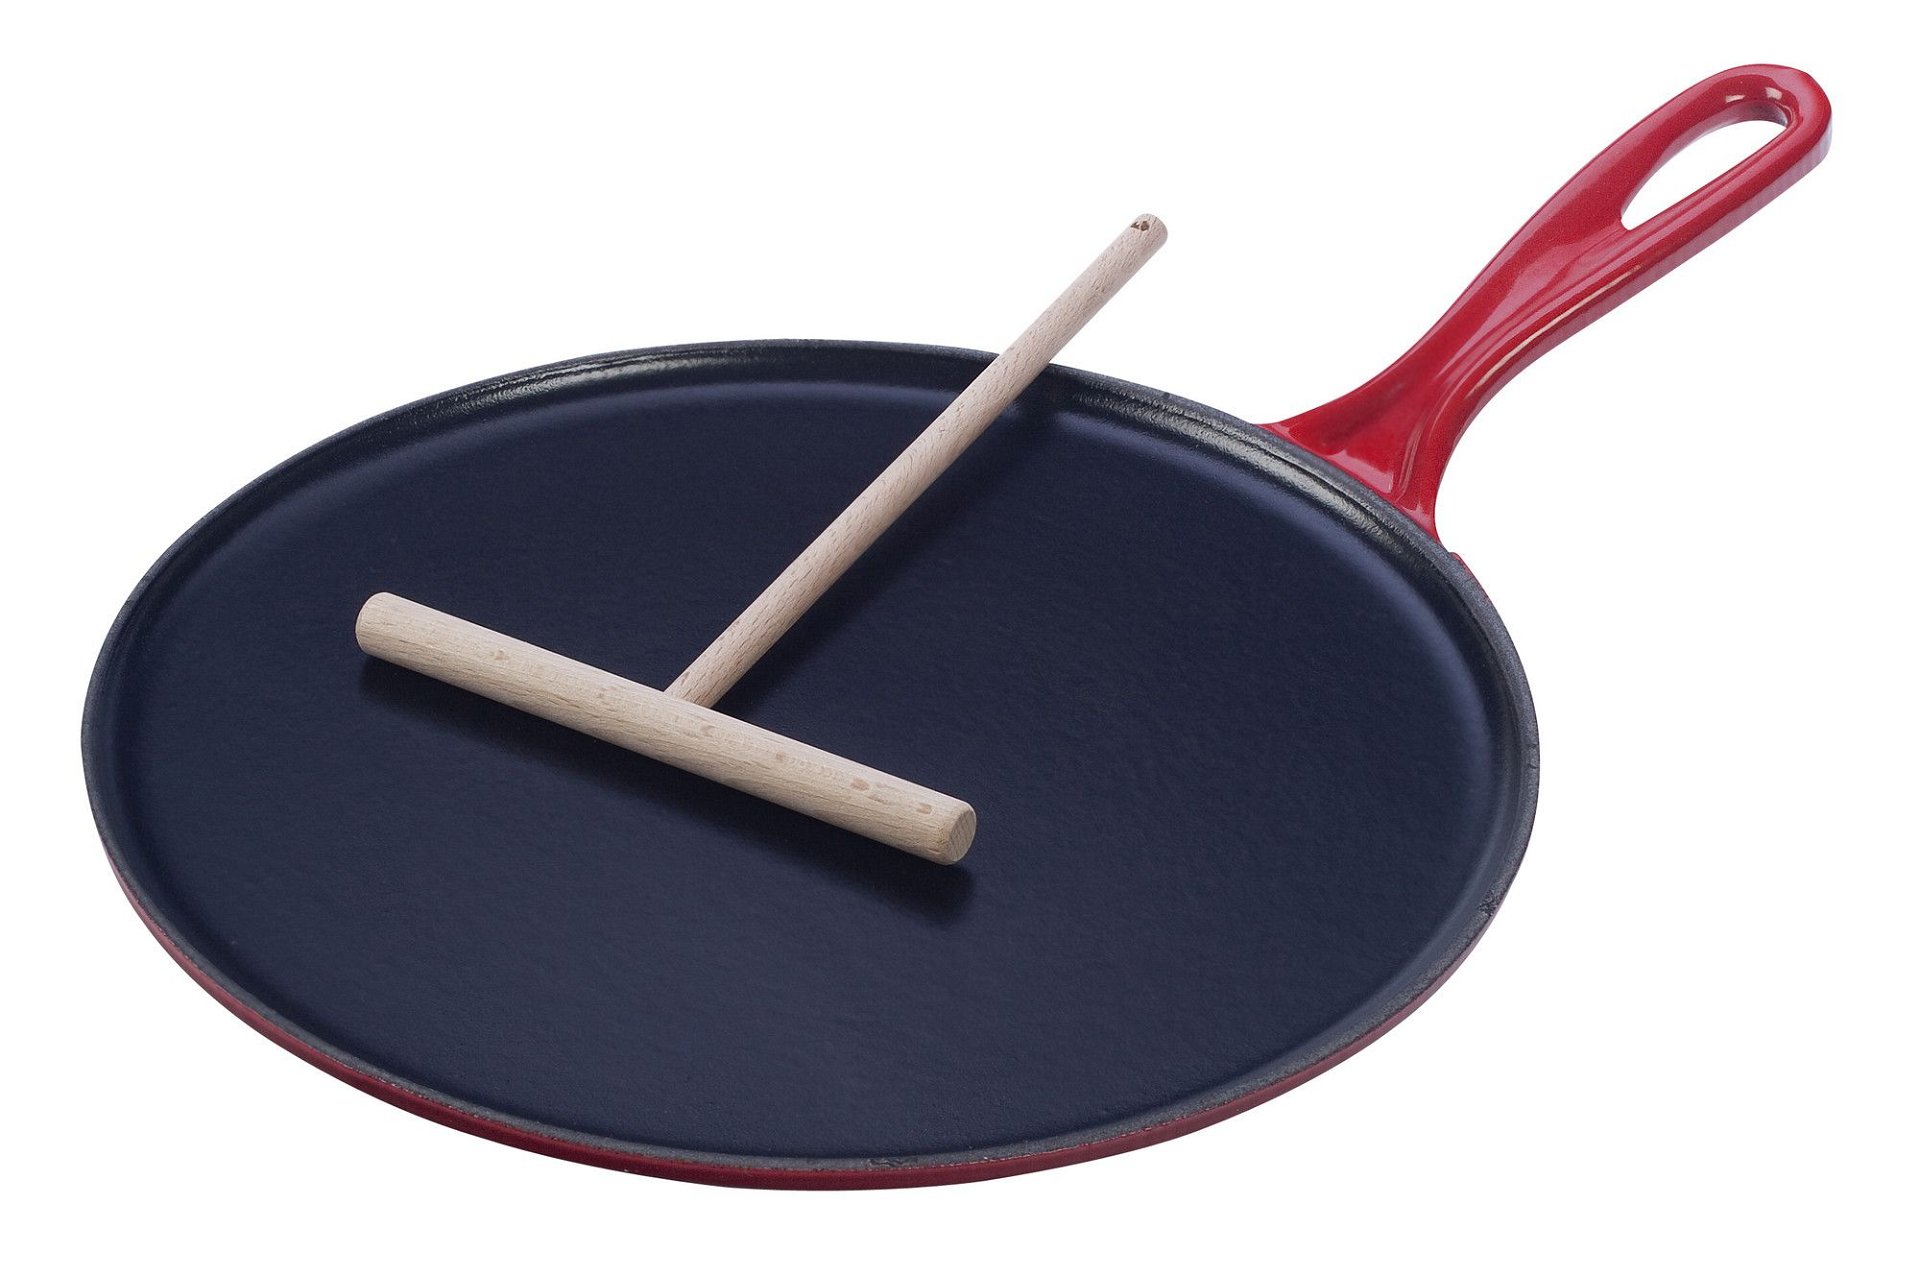 Agnes Gray Begrafenis kleuring Le Creuset 10.75" Crepe Pan with Wooden Crepe Spreader | Cerise/Cherry Red